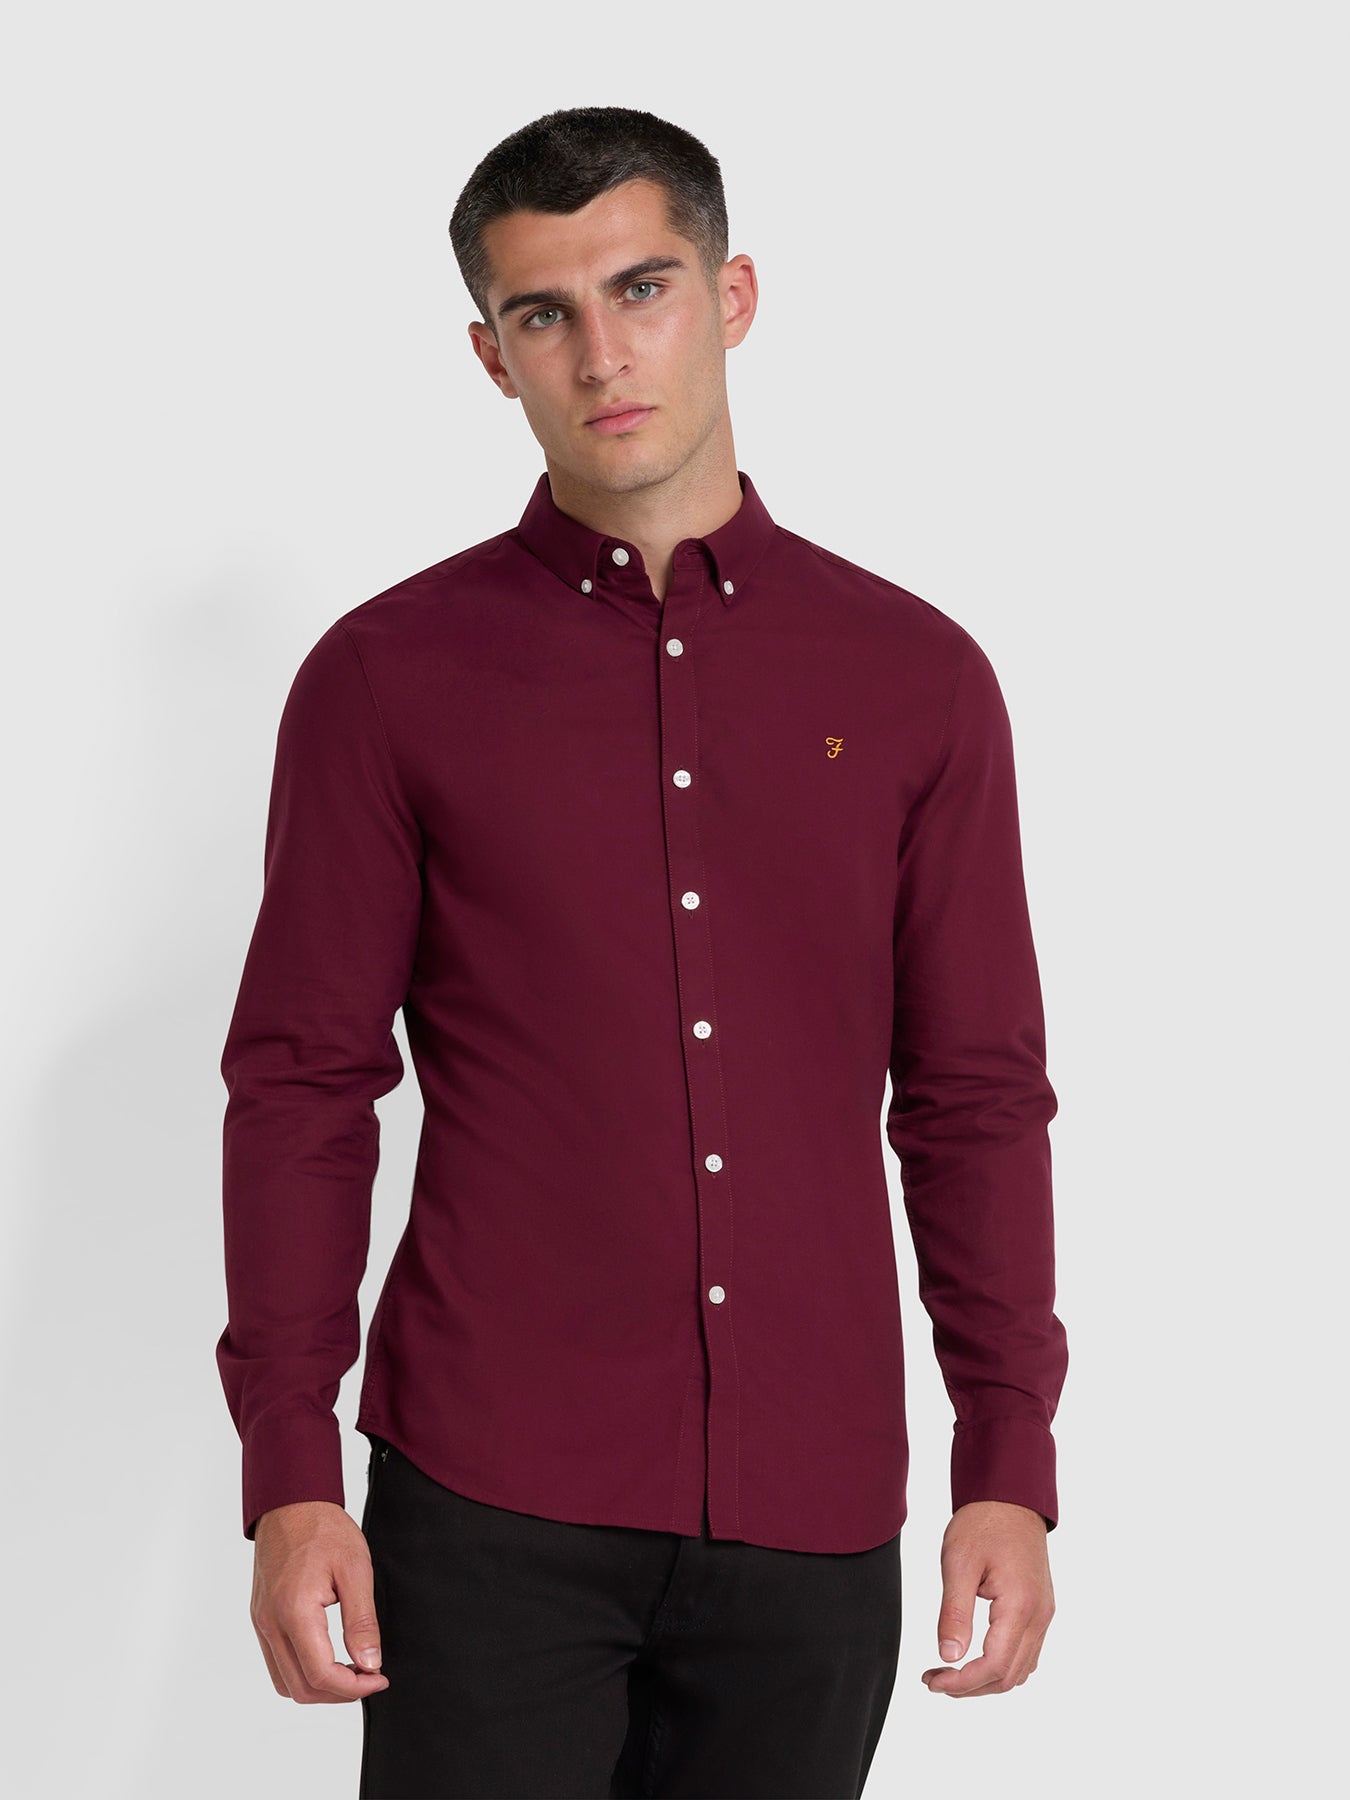 View Brewer Slim Fit Organic Cotton Oxford Shirt In Bordeaux information